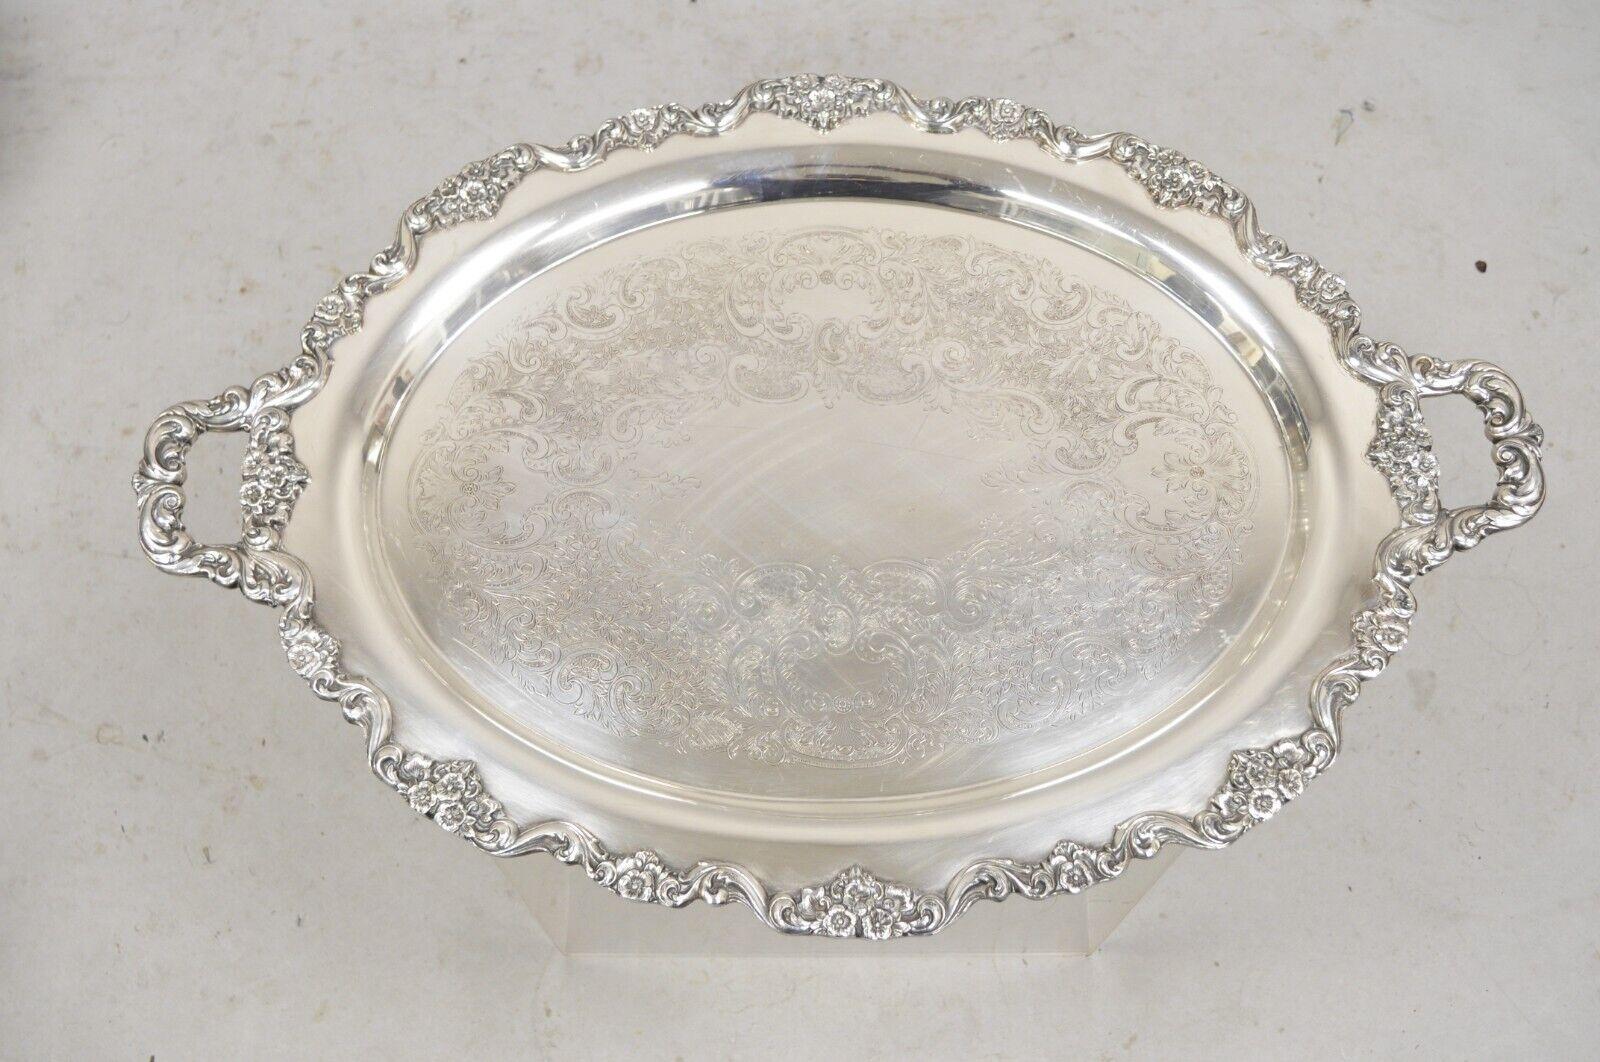 EPCA Poole Silver Co 400 Lancaster Rose Lrg Silver Plate Serving Platter Tray B For Sale 6